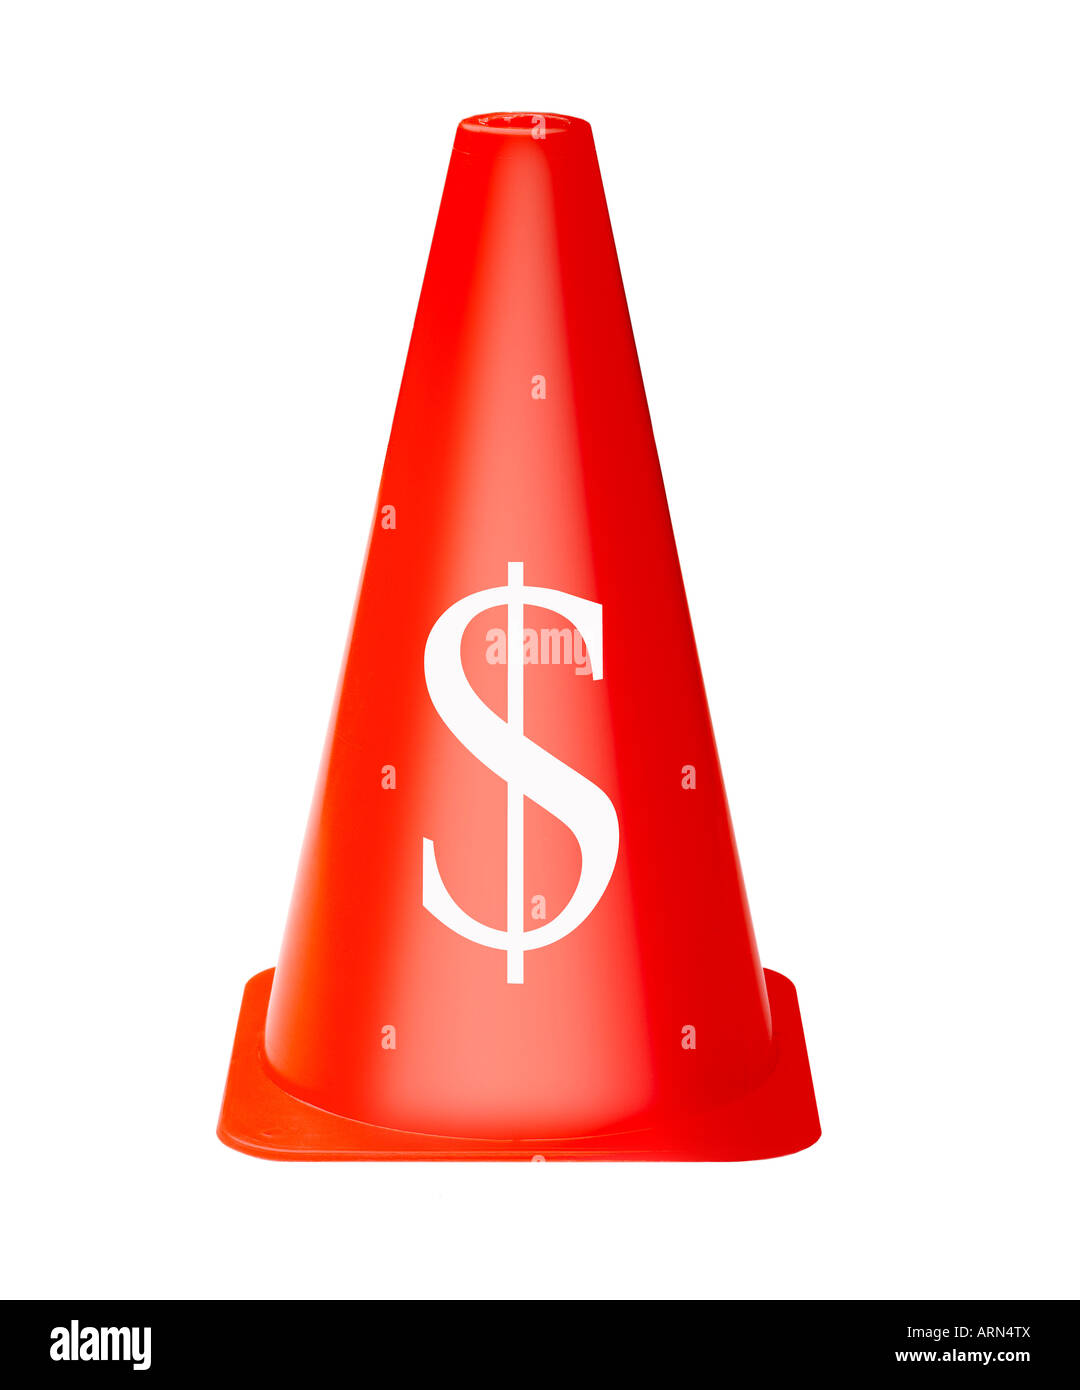 bright red safety cone with us dollar sign printed on against white cutout Stock Photo